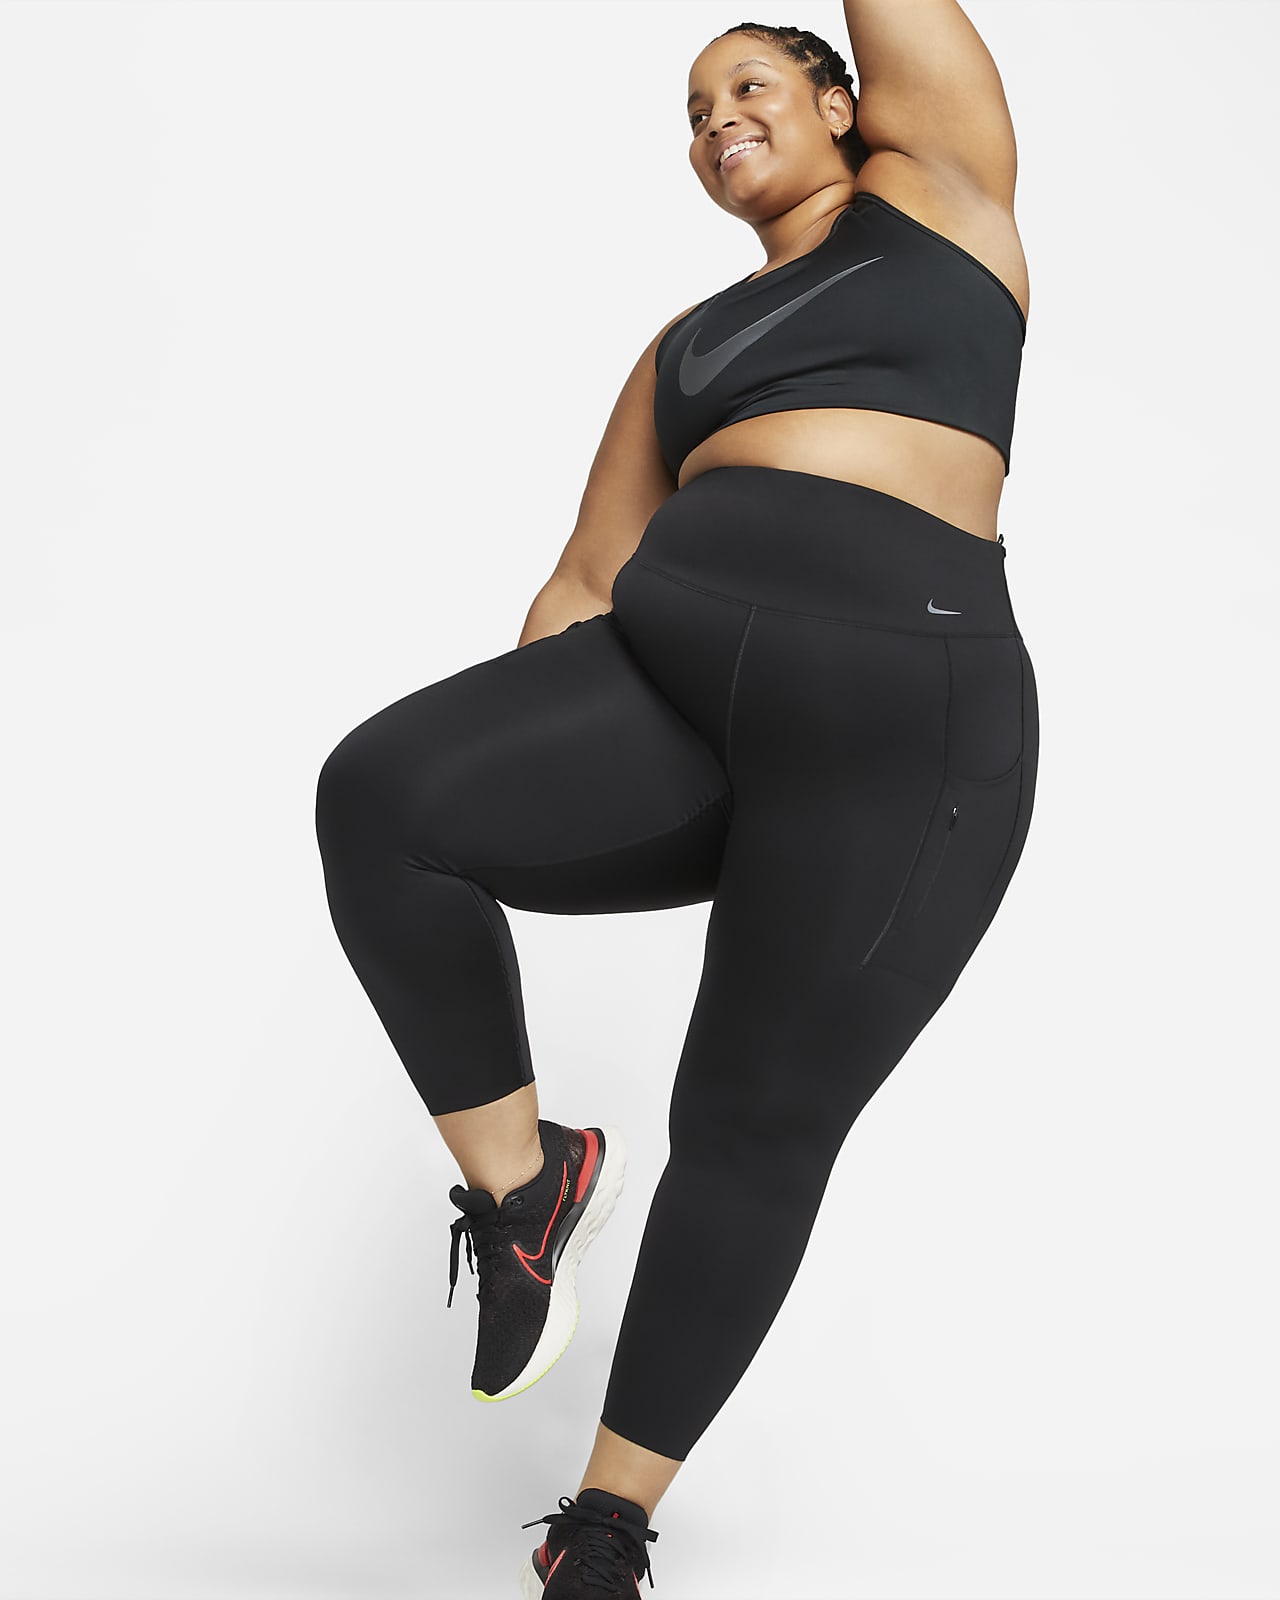 Discover more than 140 plus size leggings super hot